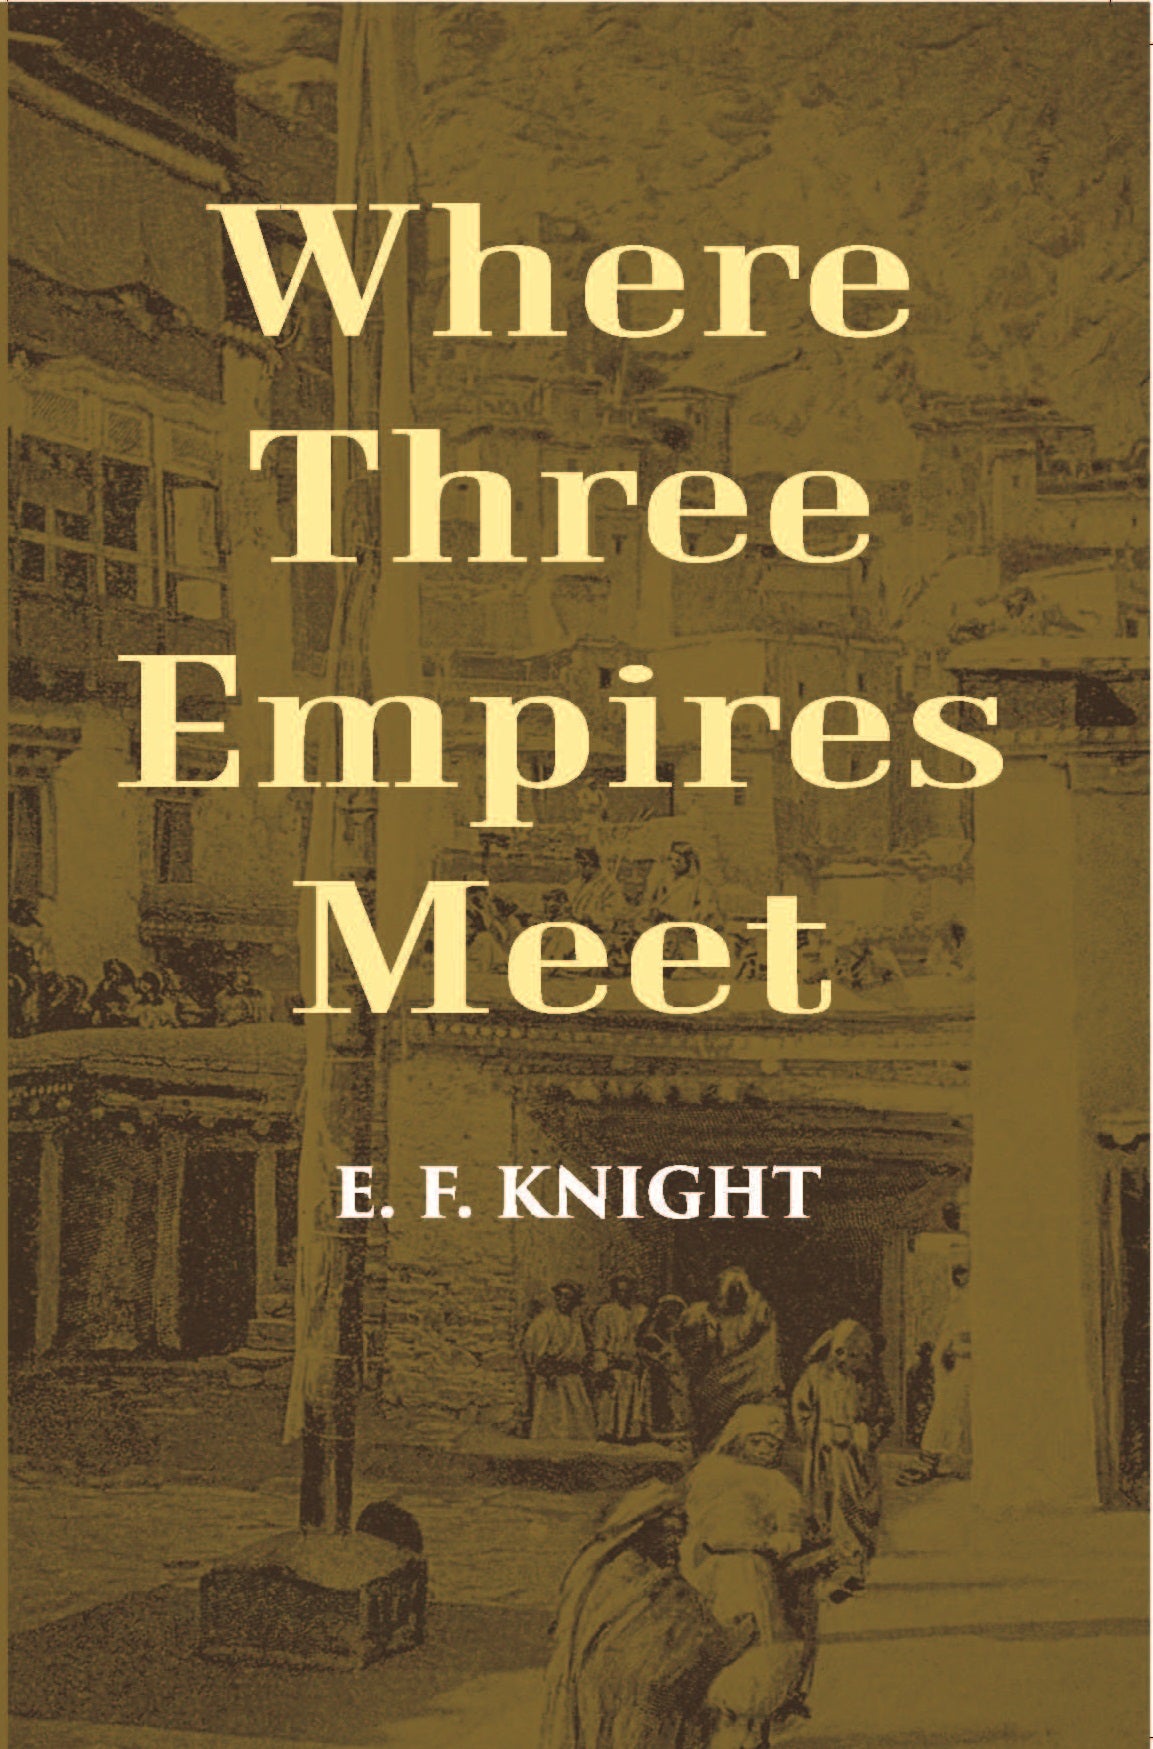 Where Three Empires Meet: A Narrative Of Recent Travel In Kashmir, Western Tibet, Gilgit, And The Adjoining Countries